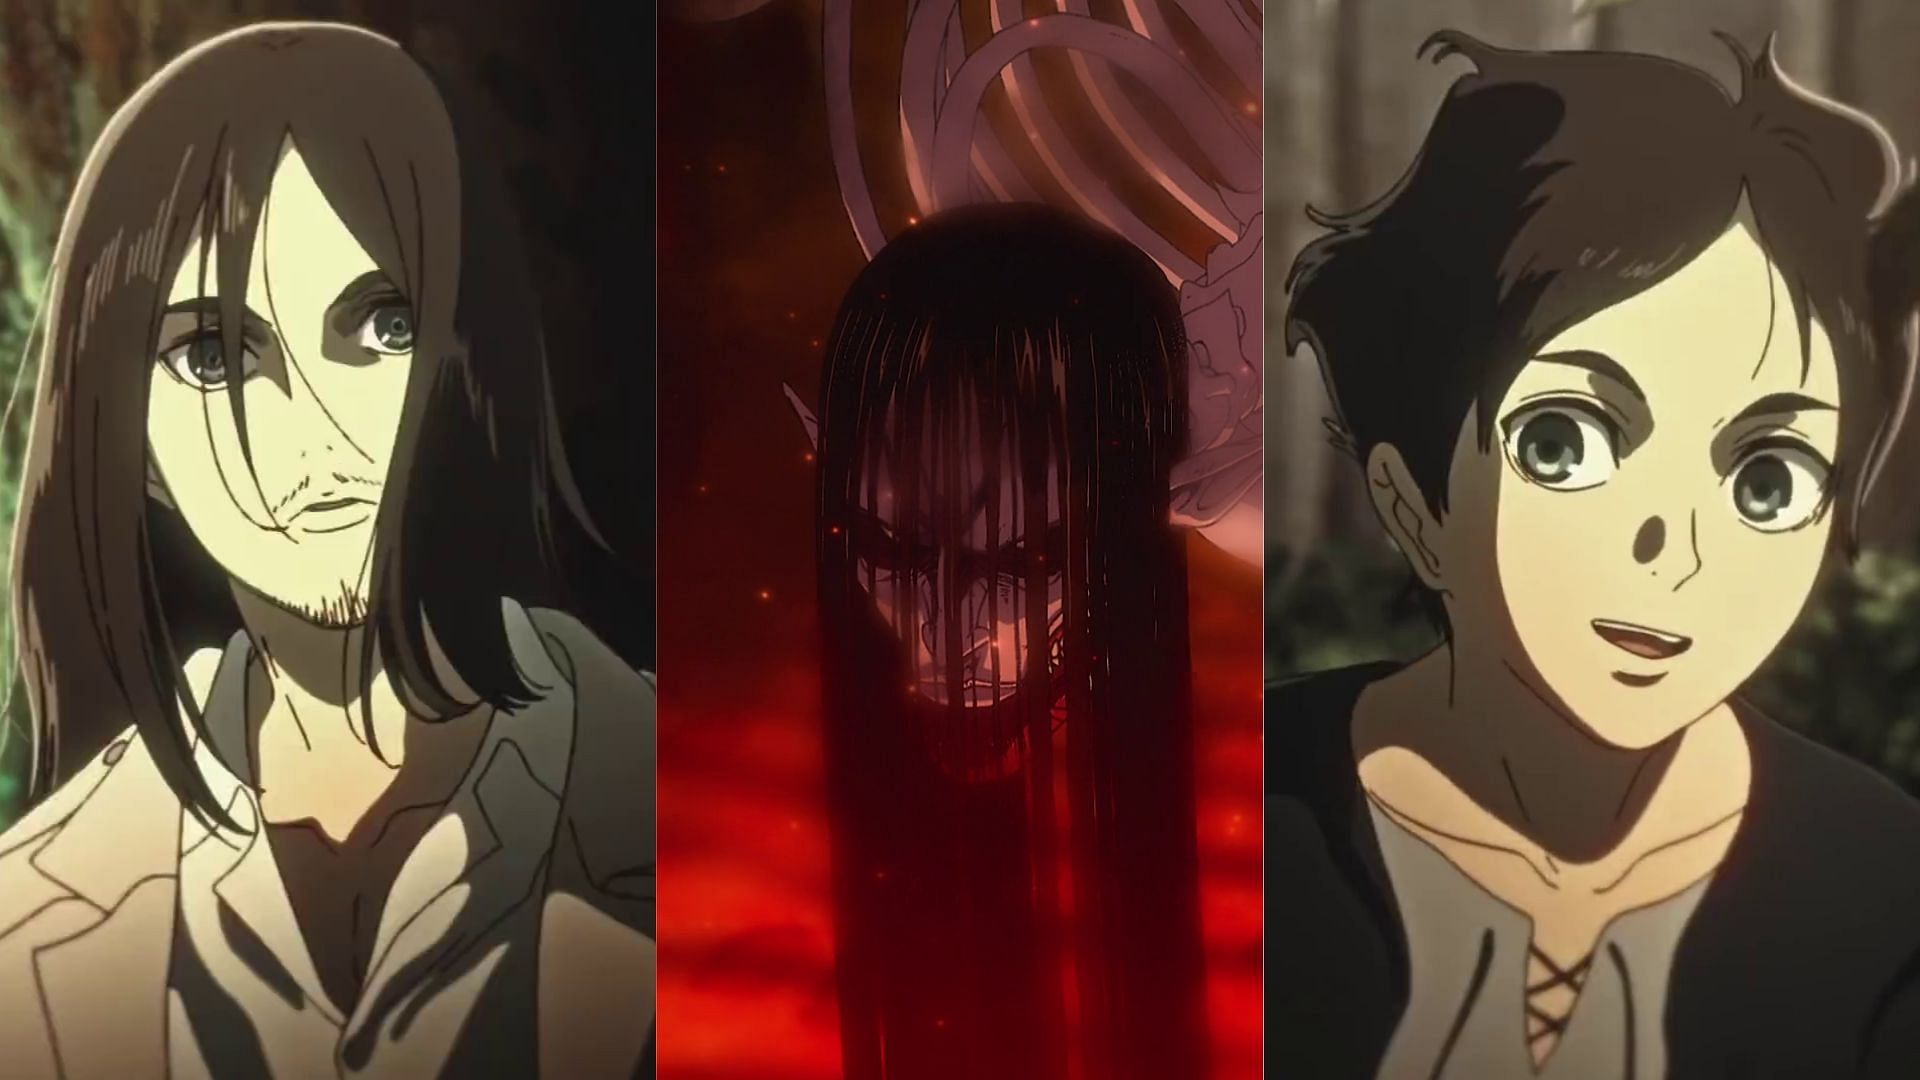 Twitter goes crazy as Eren starts the Rumbling in Attack on Titan